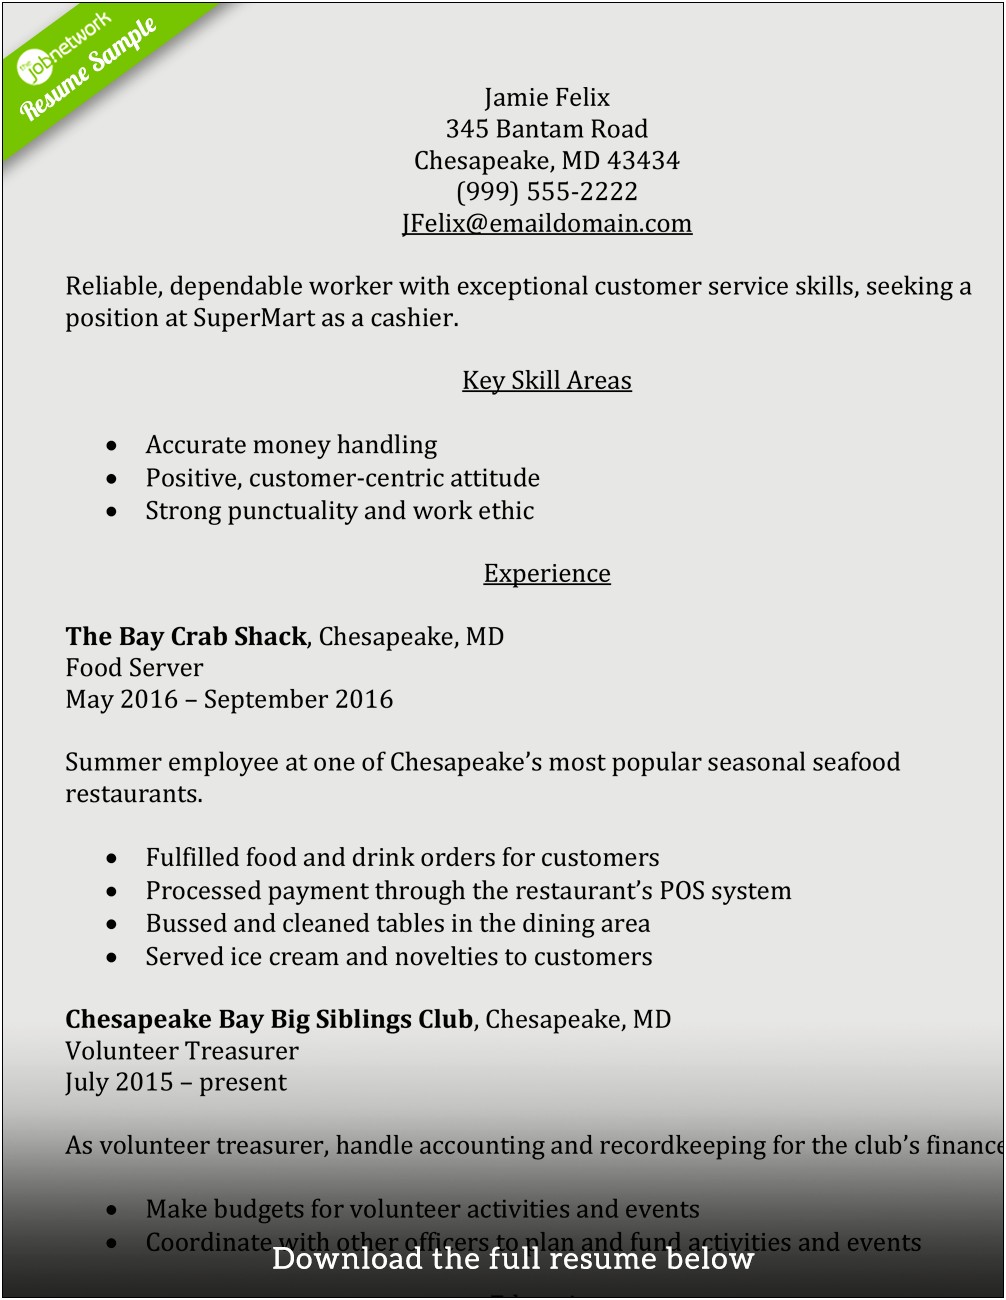 General Resume Objective Examples For Cashier